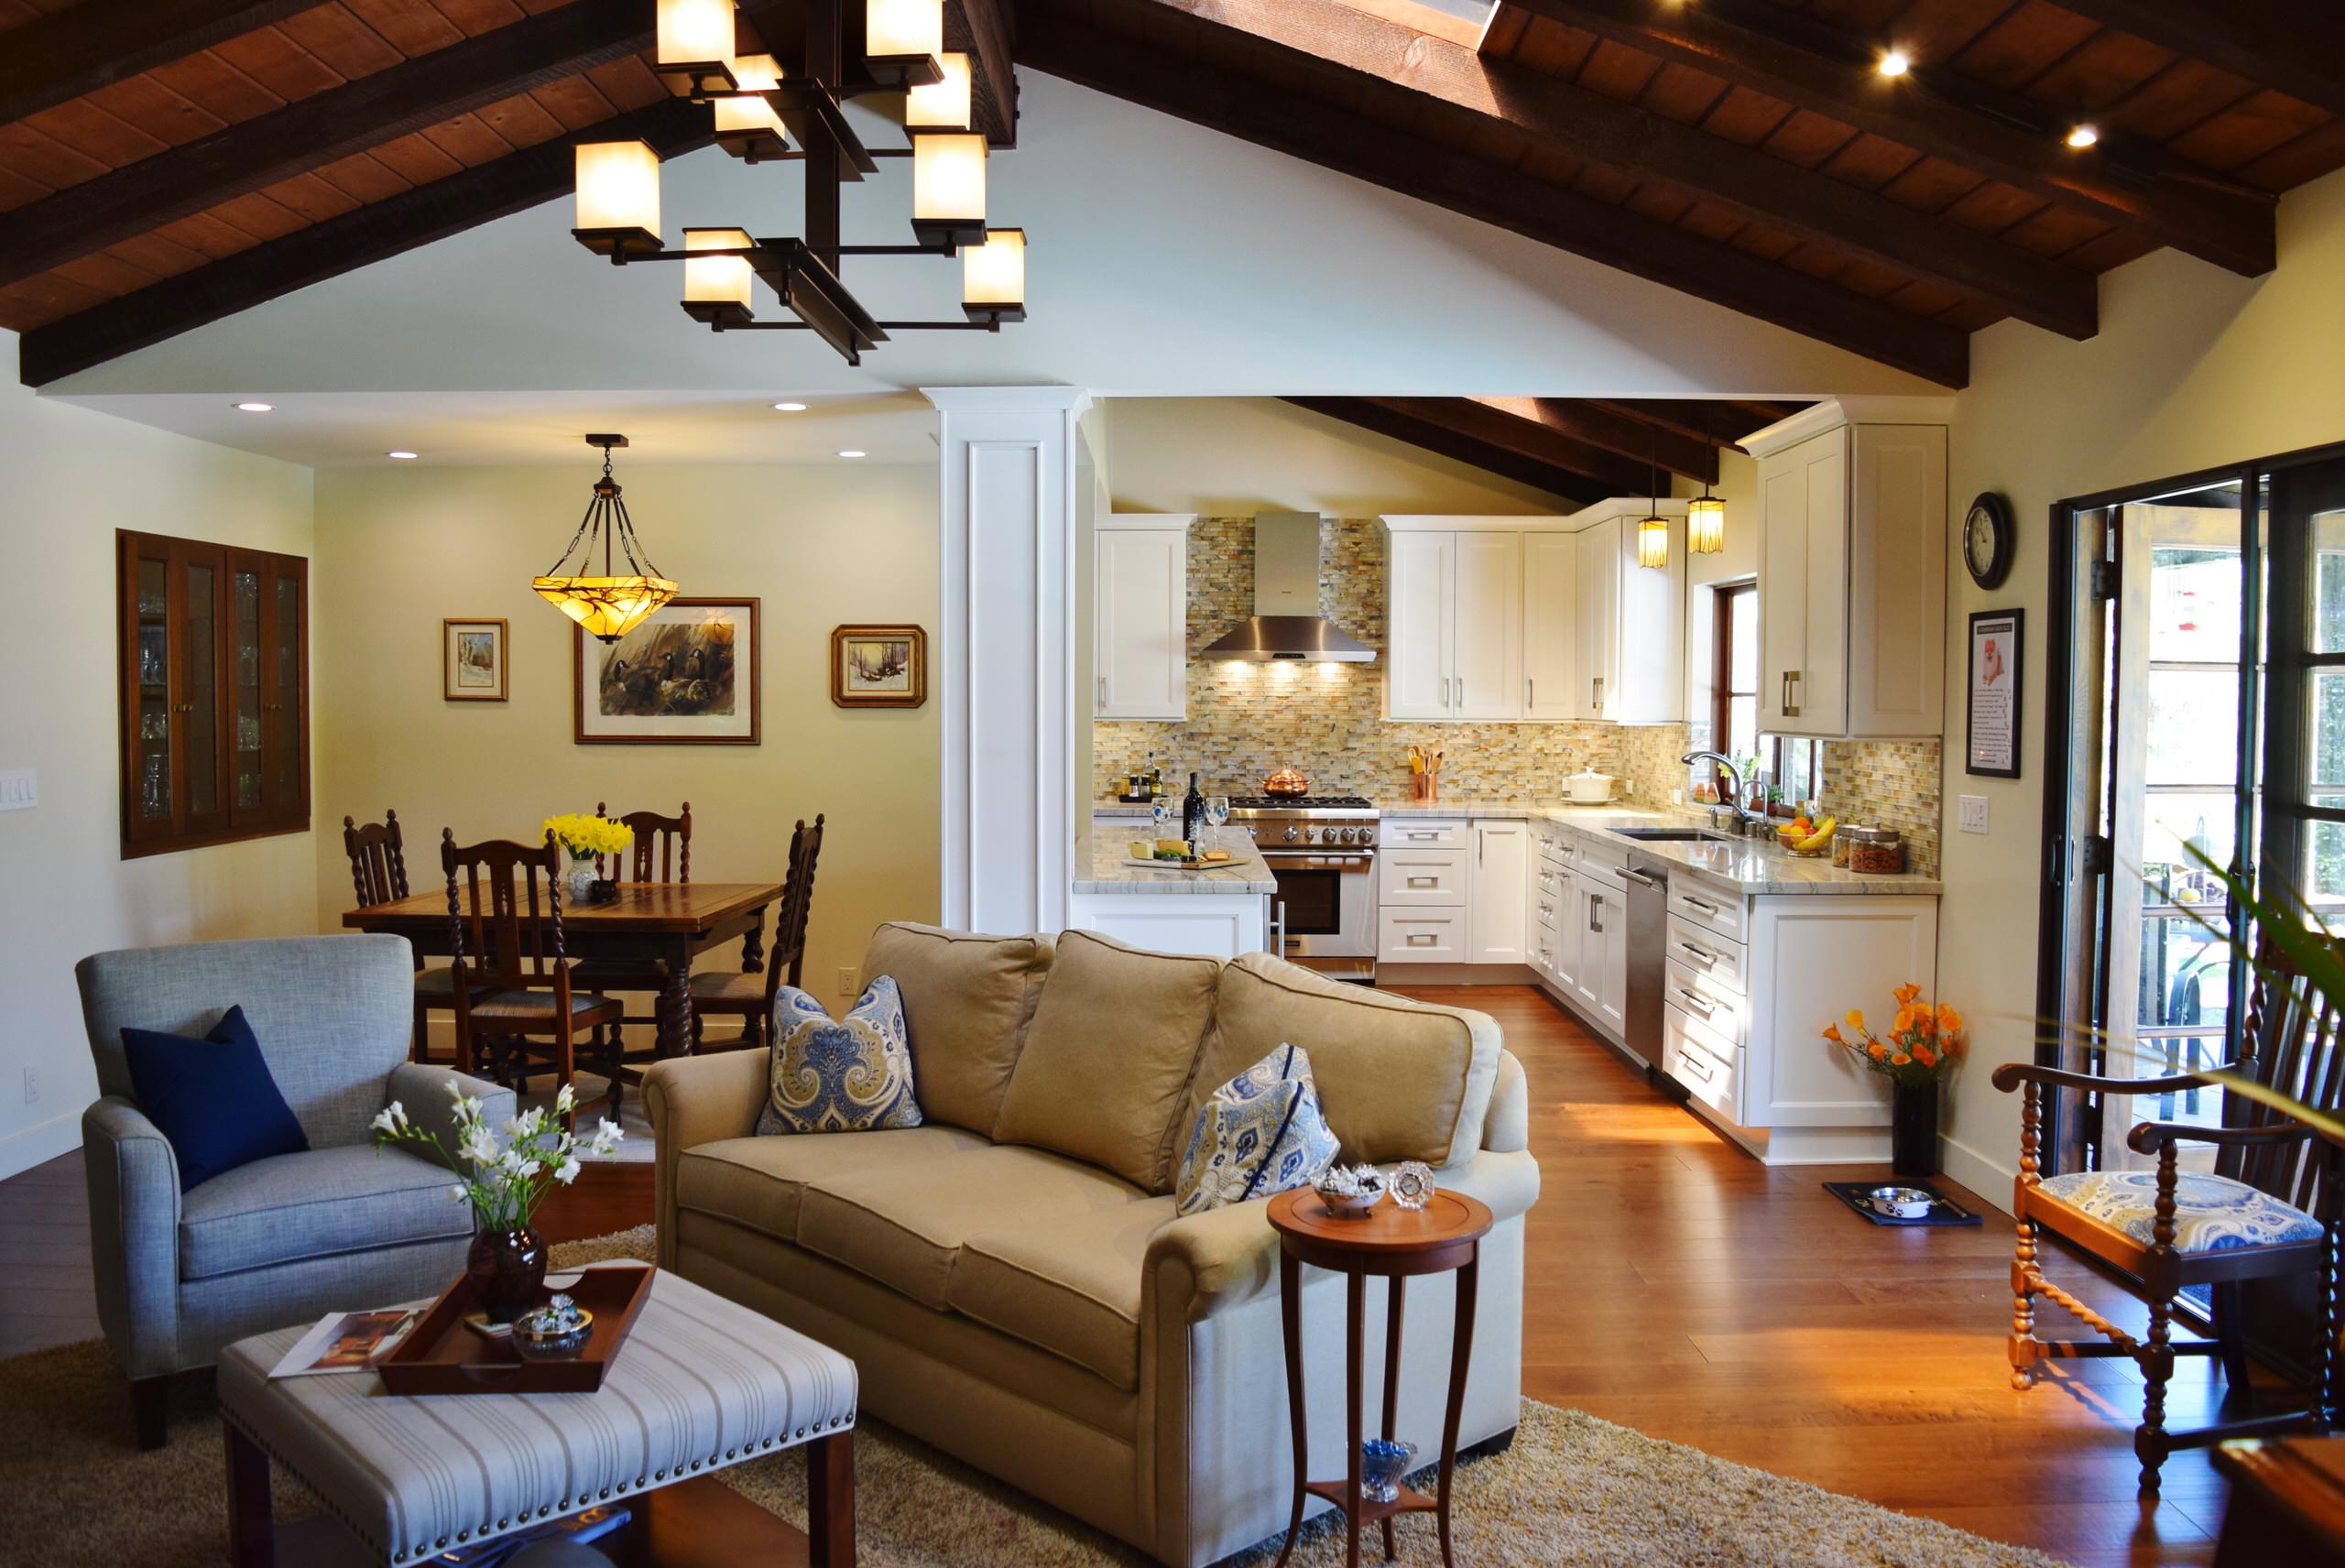 The Nash Craftsman/Transitional Kitchen and Family Room Remodel-Studio City, Ca.